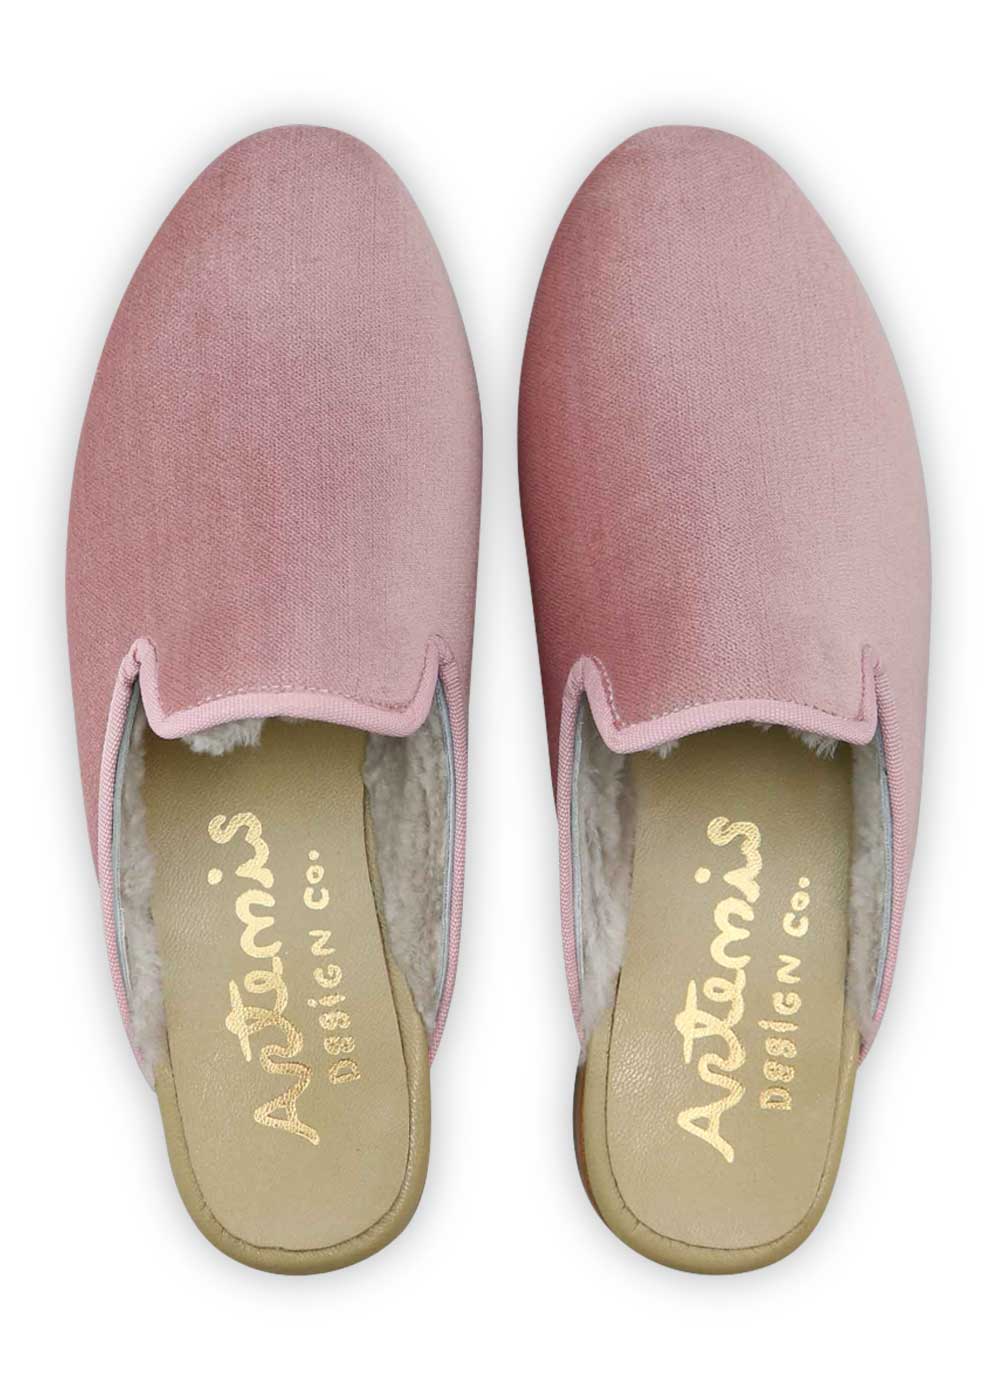 Artemis Design Co Women's Shearling-Lined Velvet Slippers in a delightful shade of pink bring a touch of luxury and femininity to your loungewear collection. These stylish slippers showcase a plush shearling lining for ultimate comfort and warmth. The soft velvet exterior adds a chic and glamorous element to your relaxation routine. ( Front View)